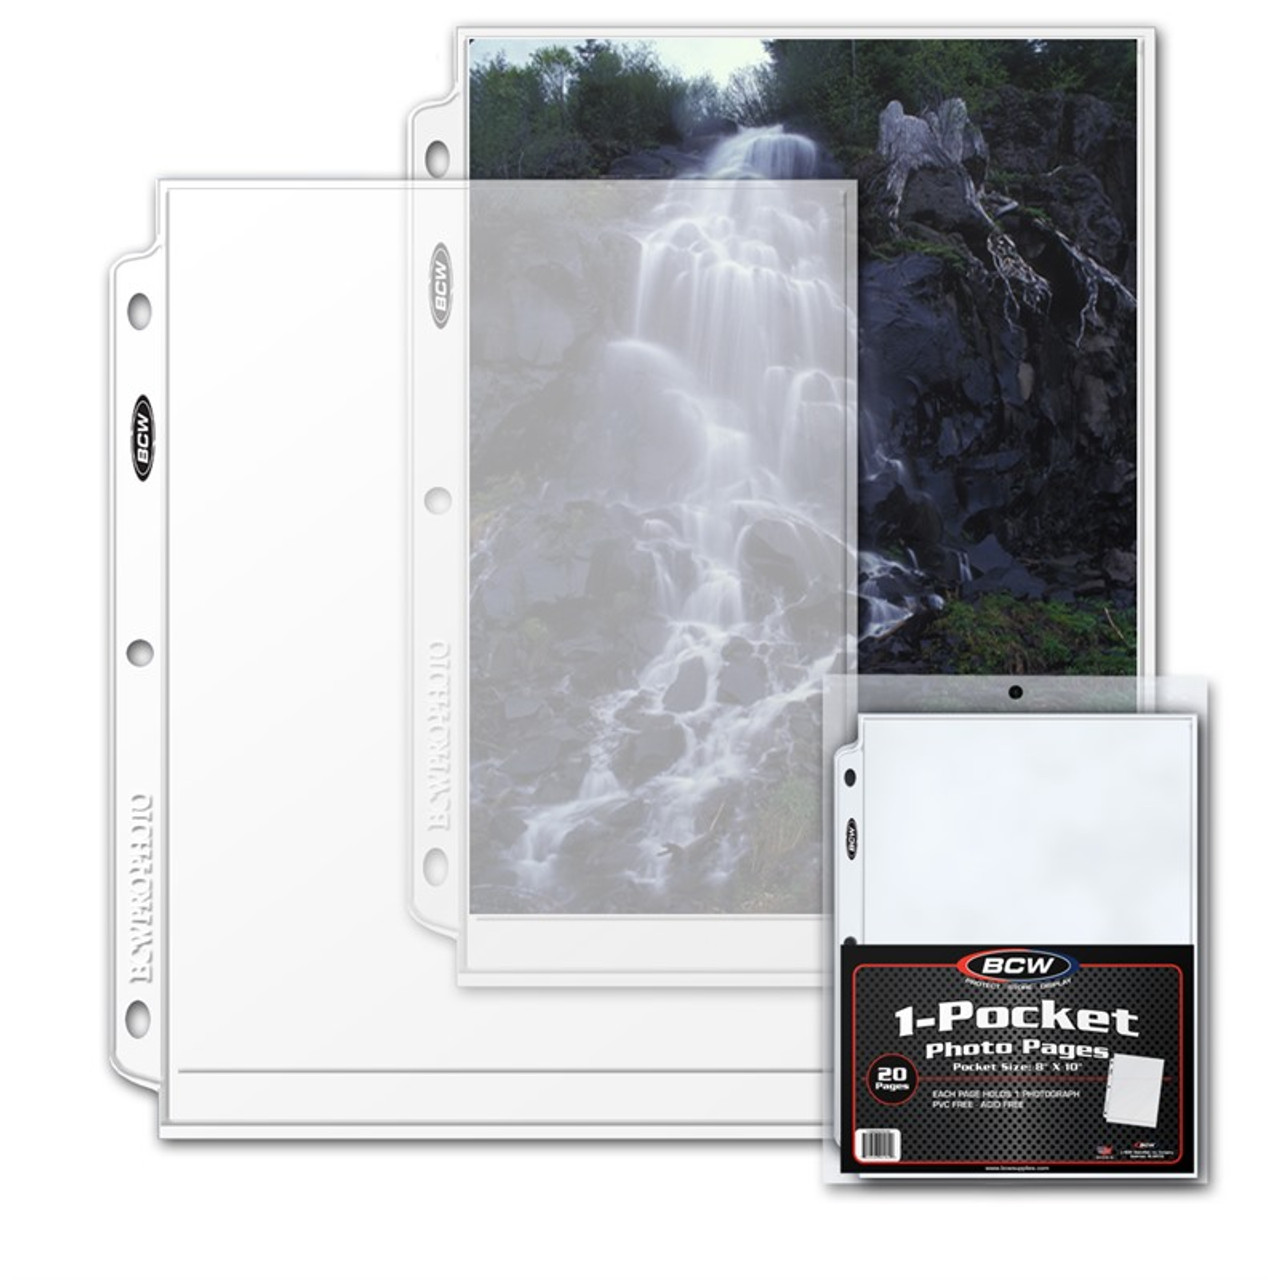 BCW Pro 1-Pocket 8x10 Photo Pages 20ct Pack / Case of 25